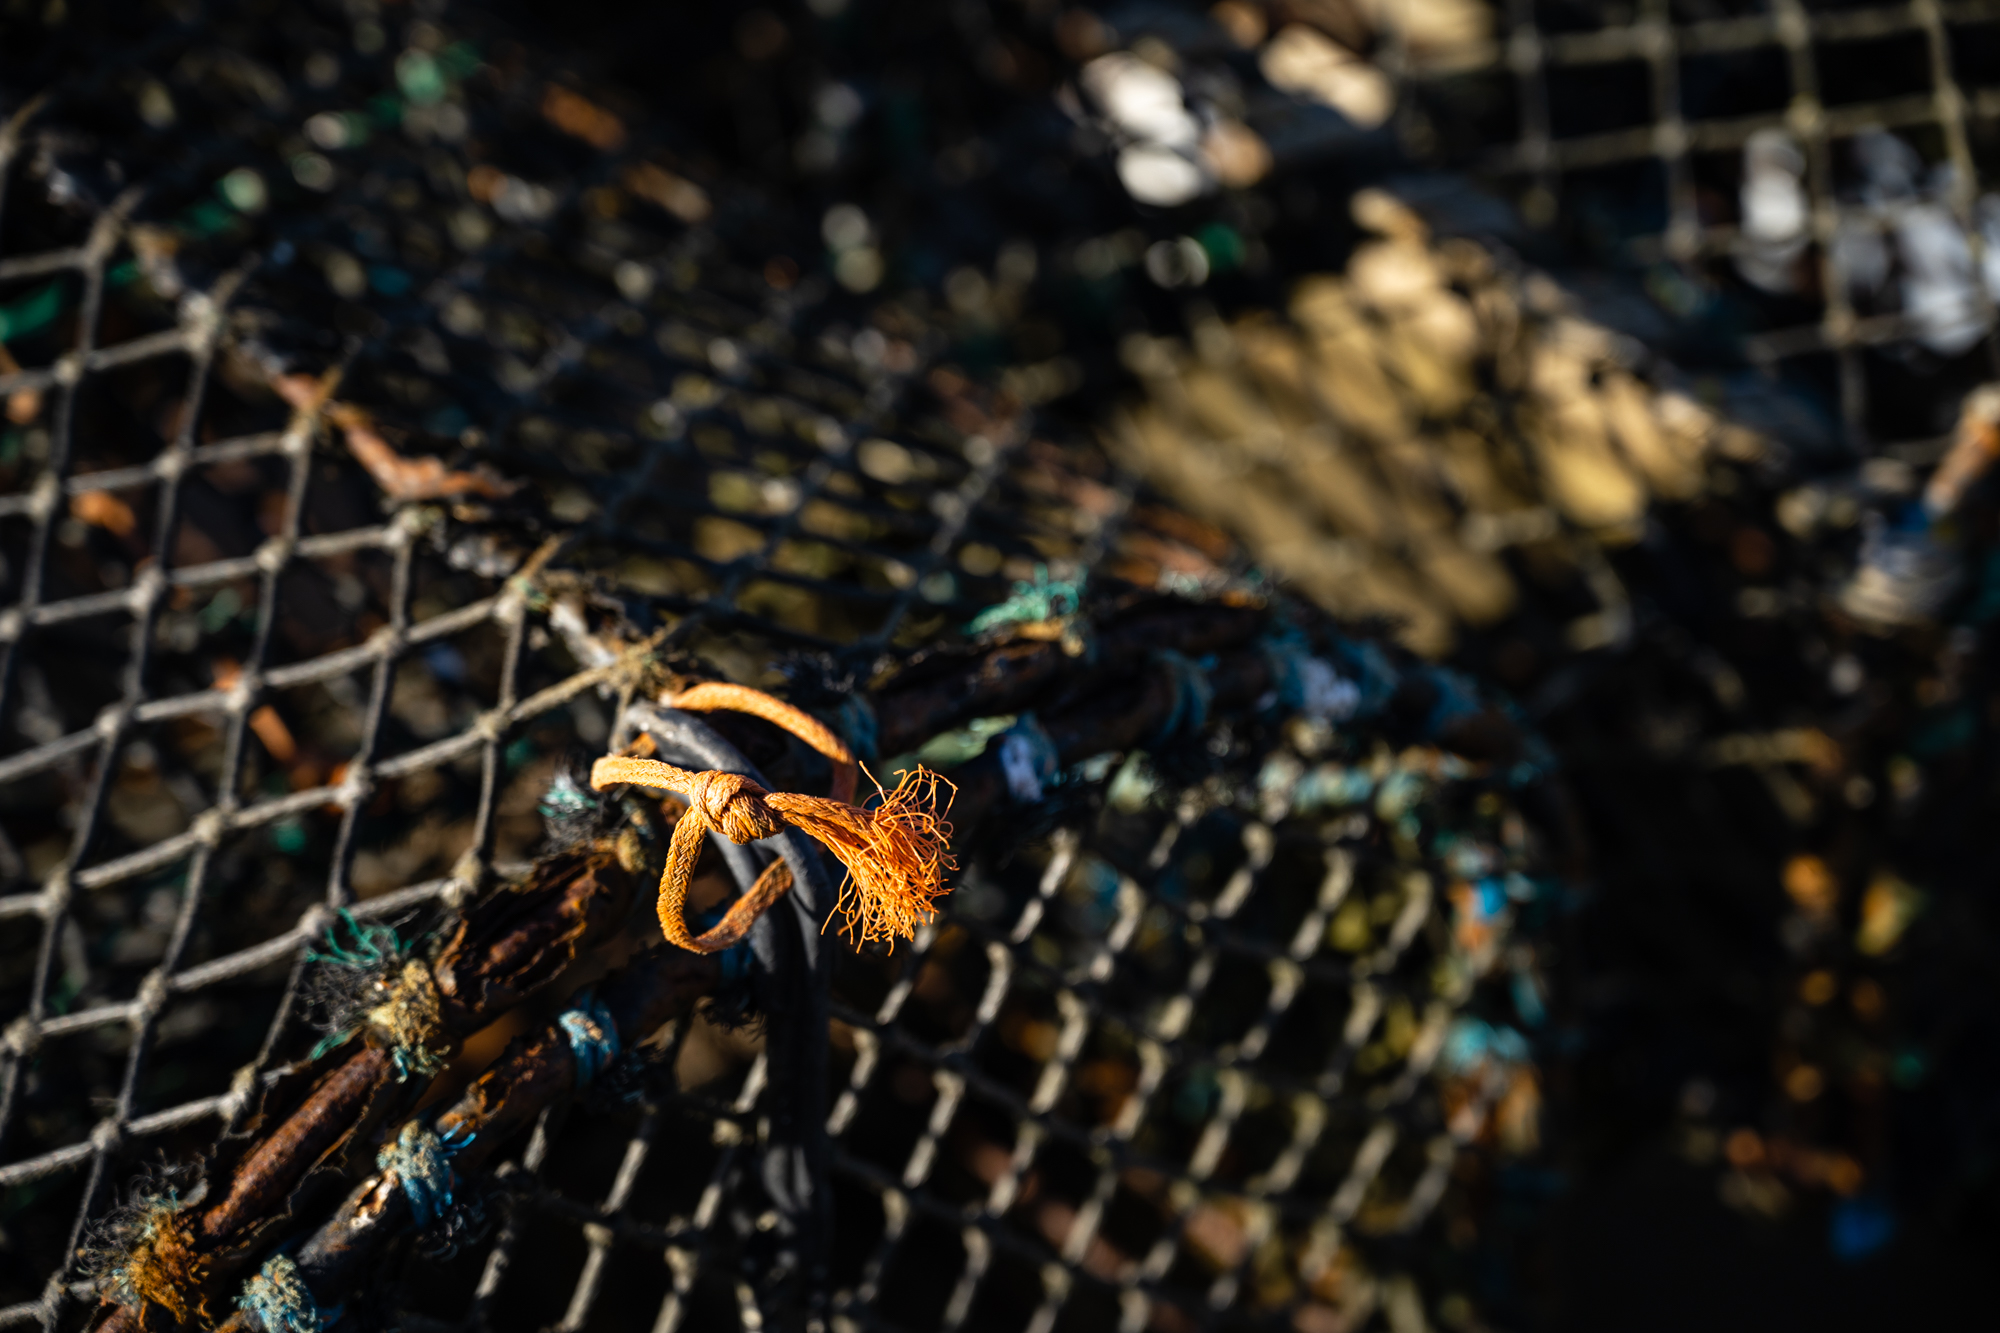 Sony FE 20-70mm F4 G lens sample image close up of lobster nets